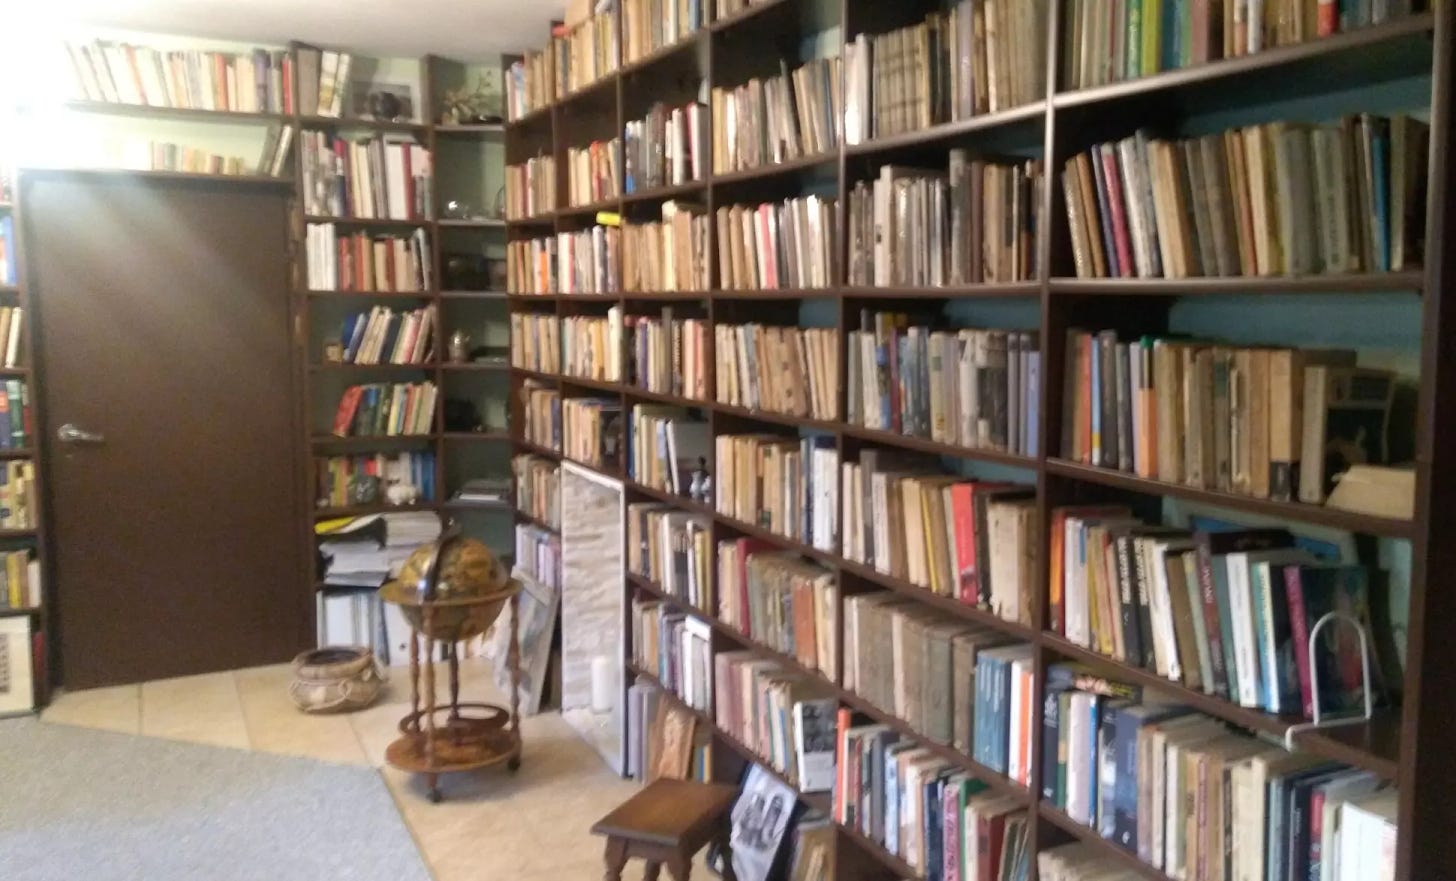 A fragment of our home library